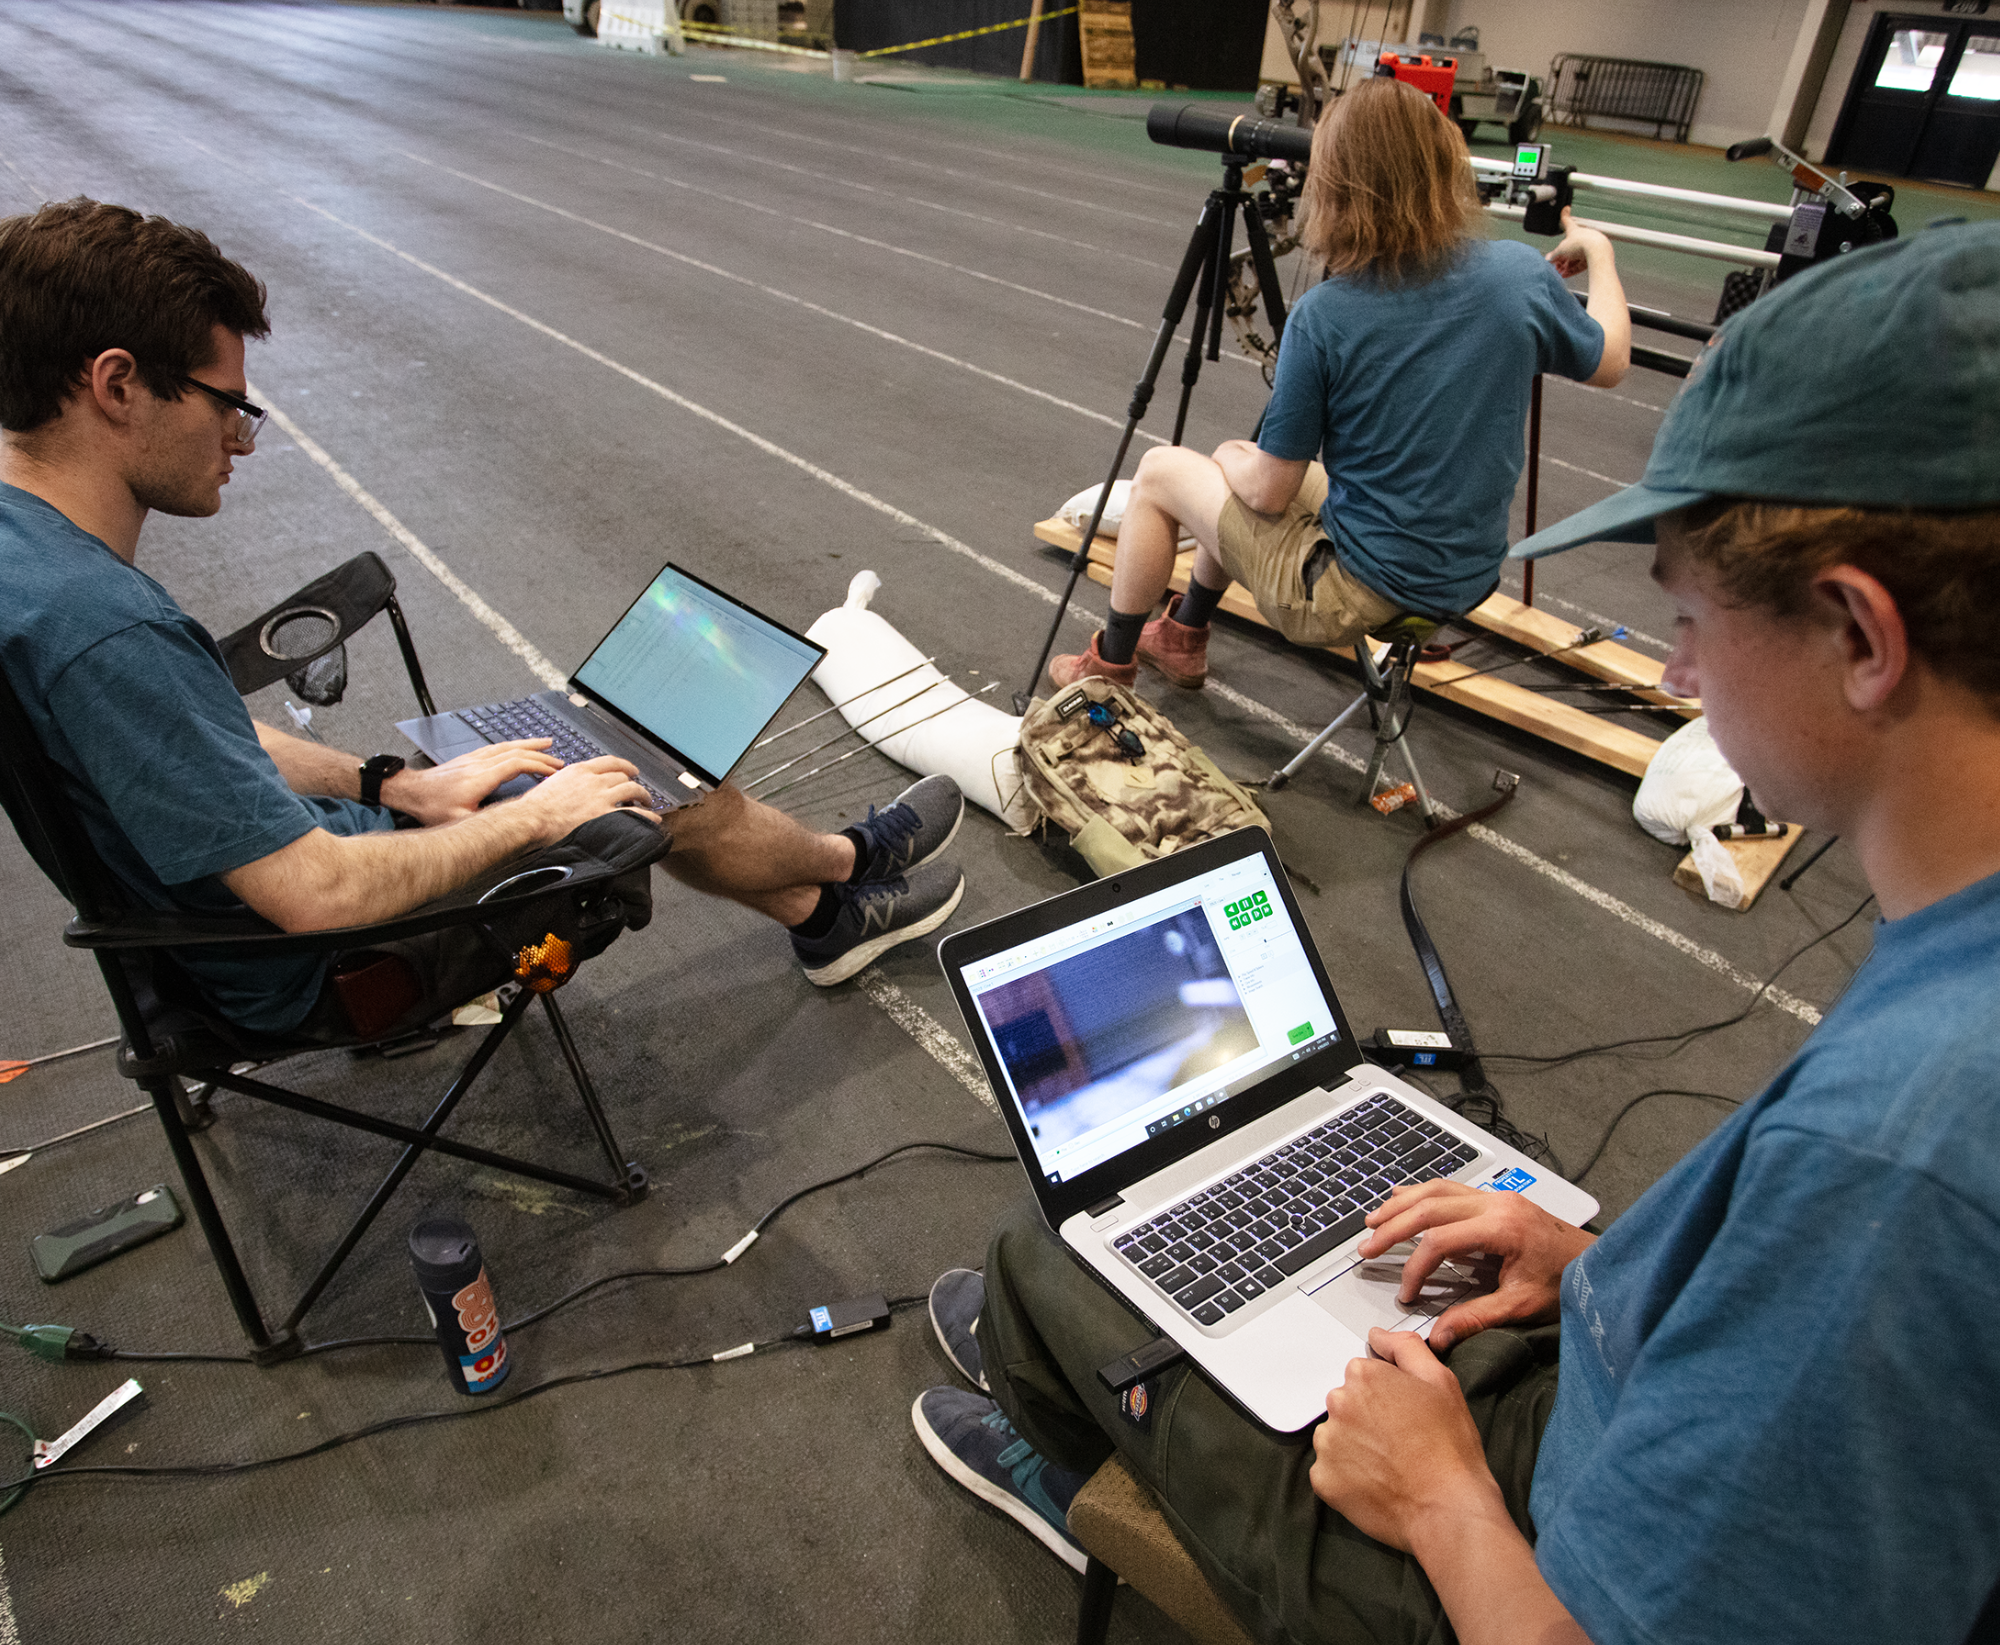 University scientists are plotting away on their laptops in a spreadsheet and some sort of a viewer program while in the background another looks through a spotting scope in a sports warehouse